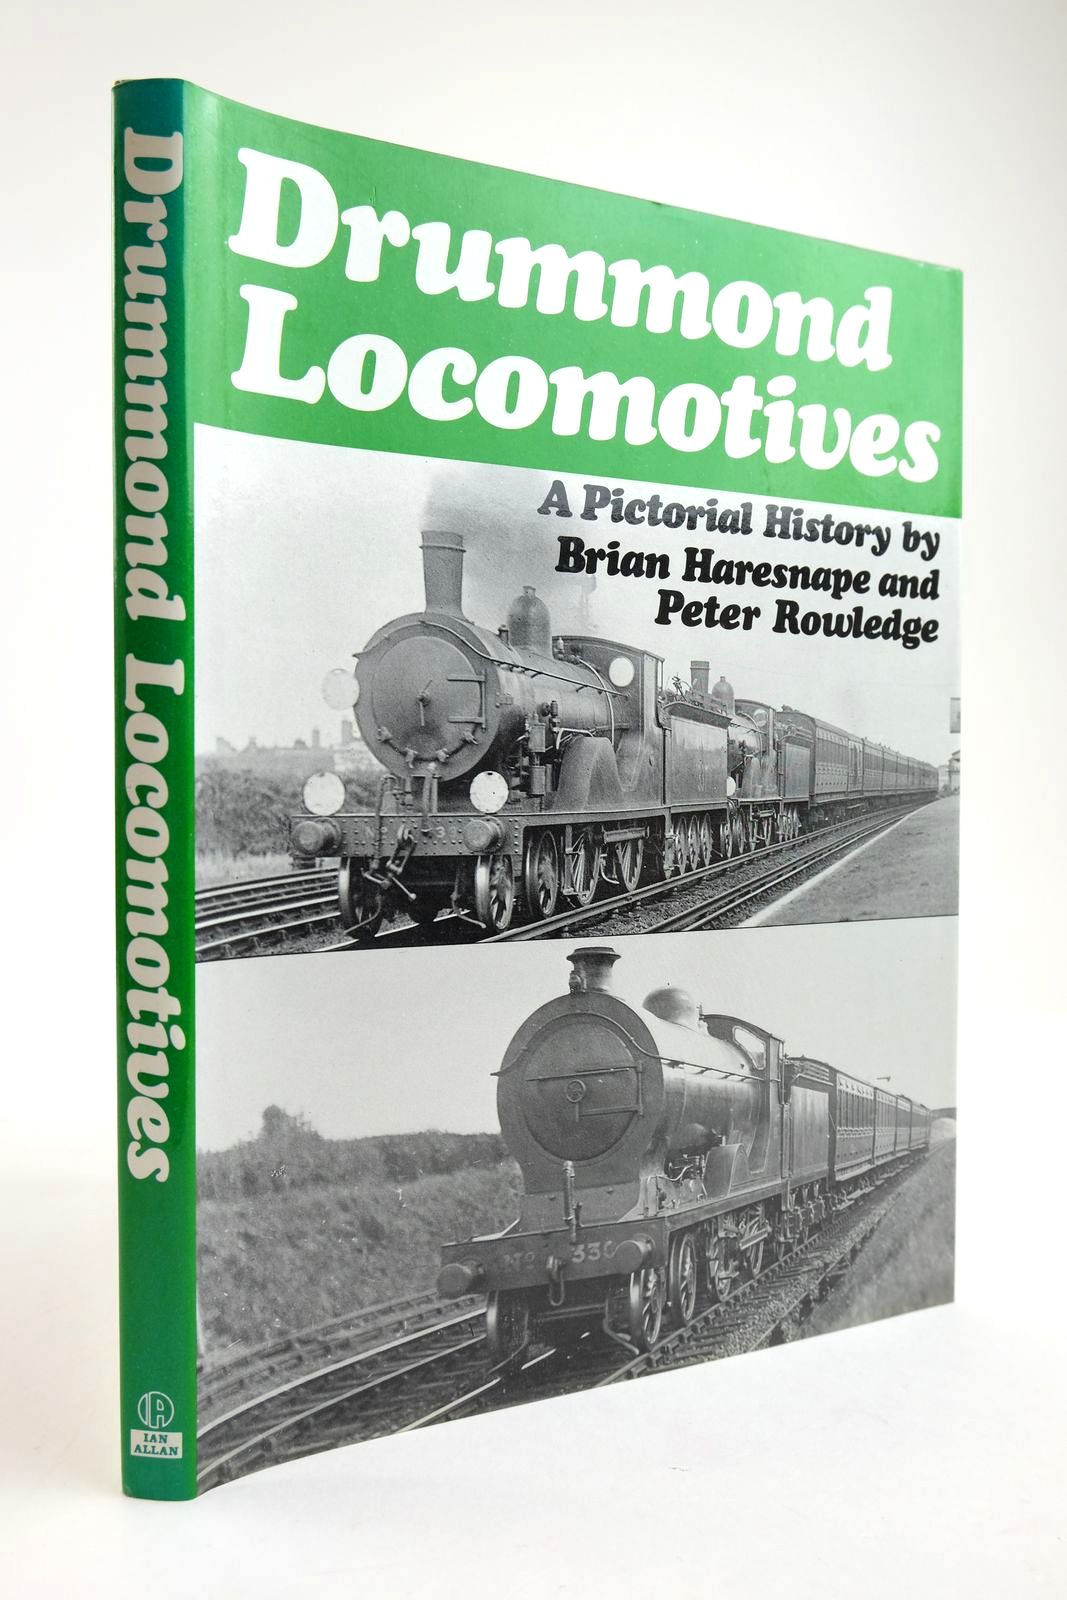 Photo of DRUMMOND LOCOMOTIVES A PICTORIAL HISTORY written by Haresnape, Brian Rowledge, Peter published by Ian Allan (STOCK CODE: 2133798)  for sale by Stella & Rose's Books